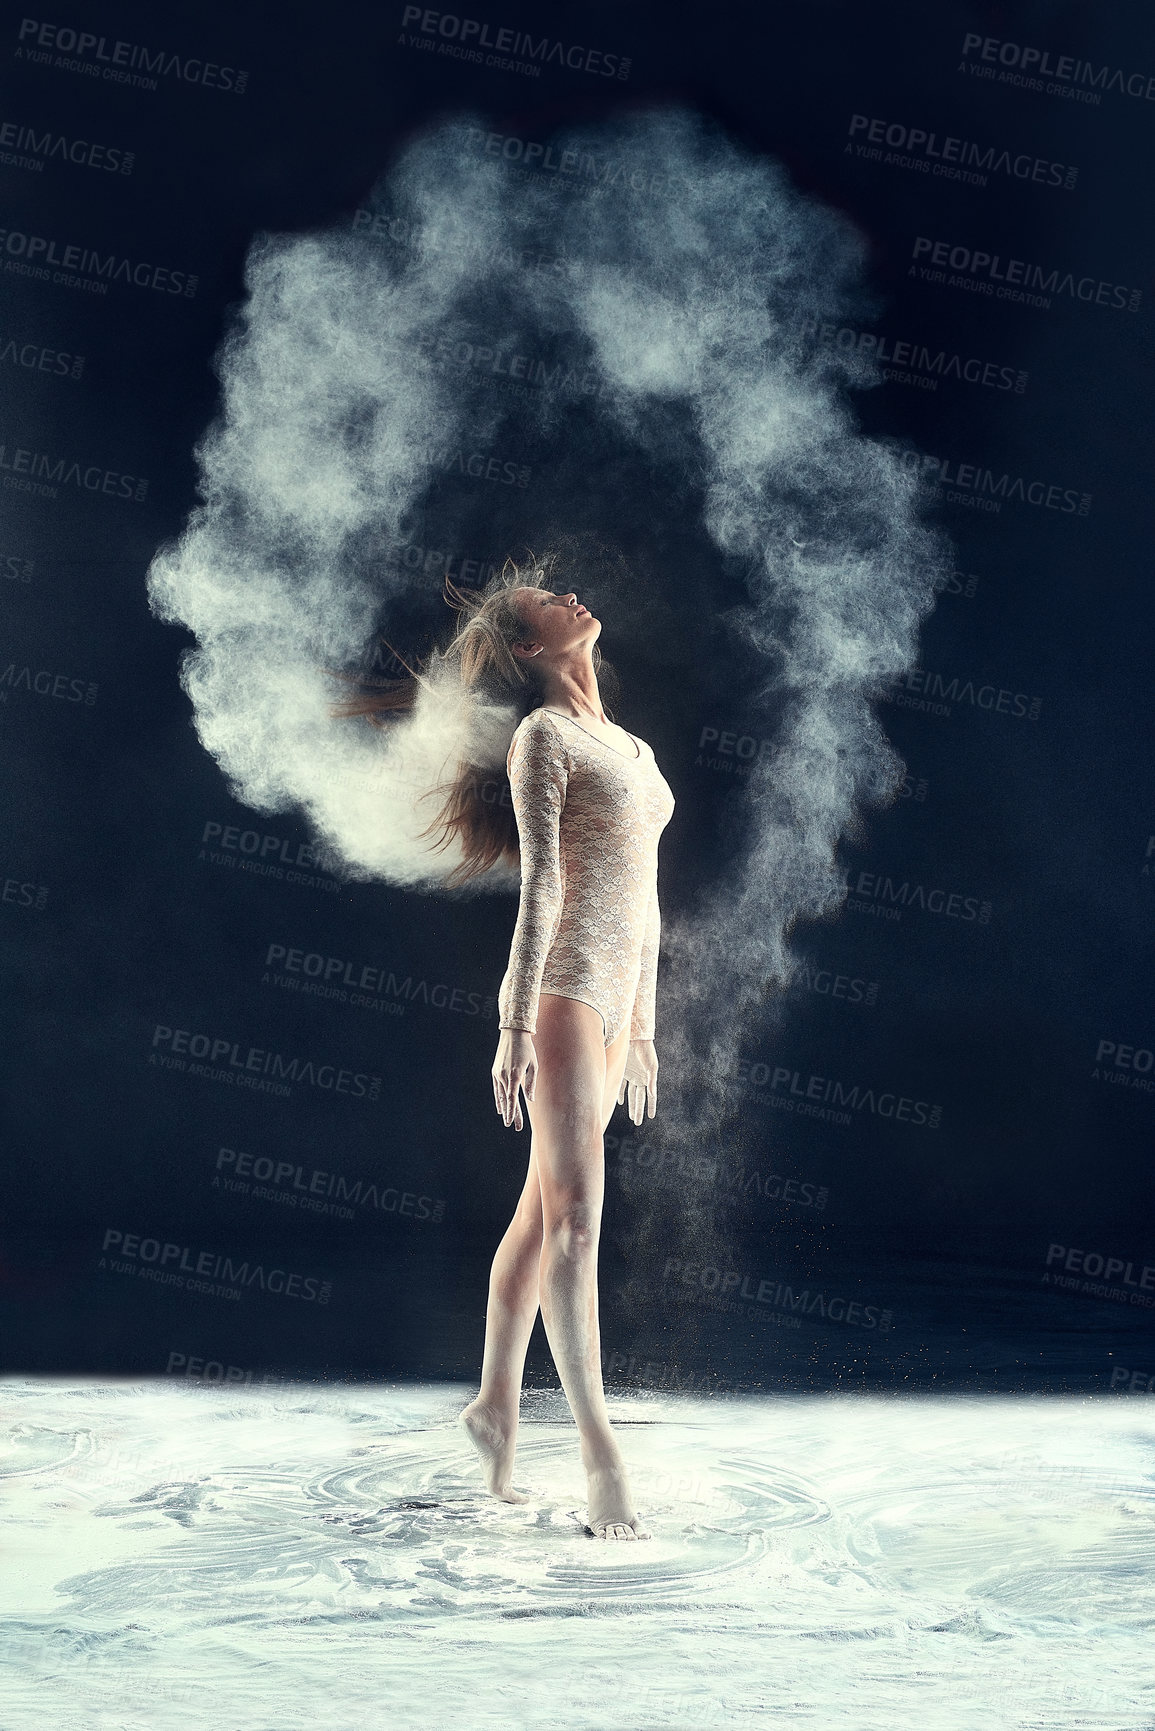 Buy stock photo Studio shot of a young woman leaving a trail of powder in the air by whipping her hair